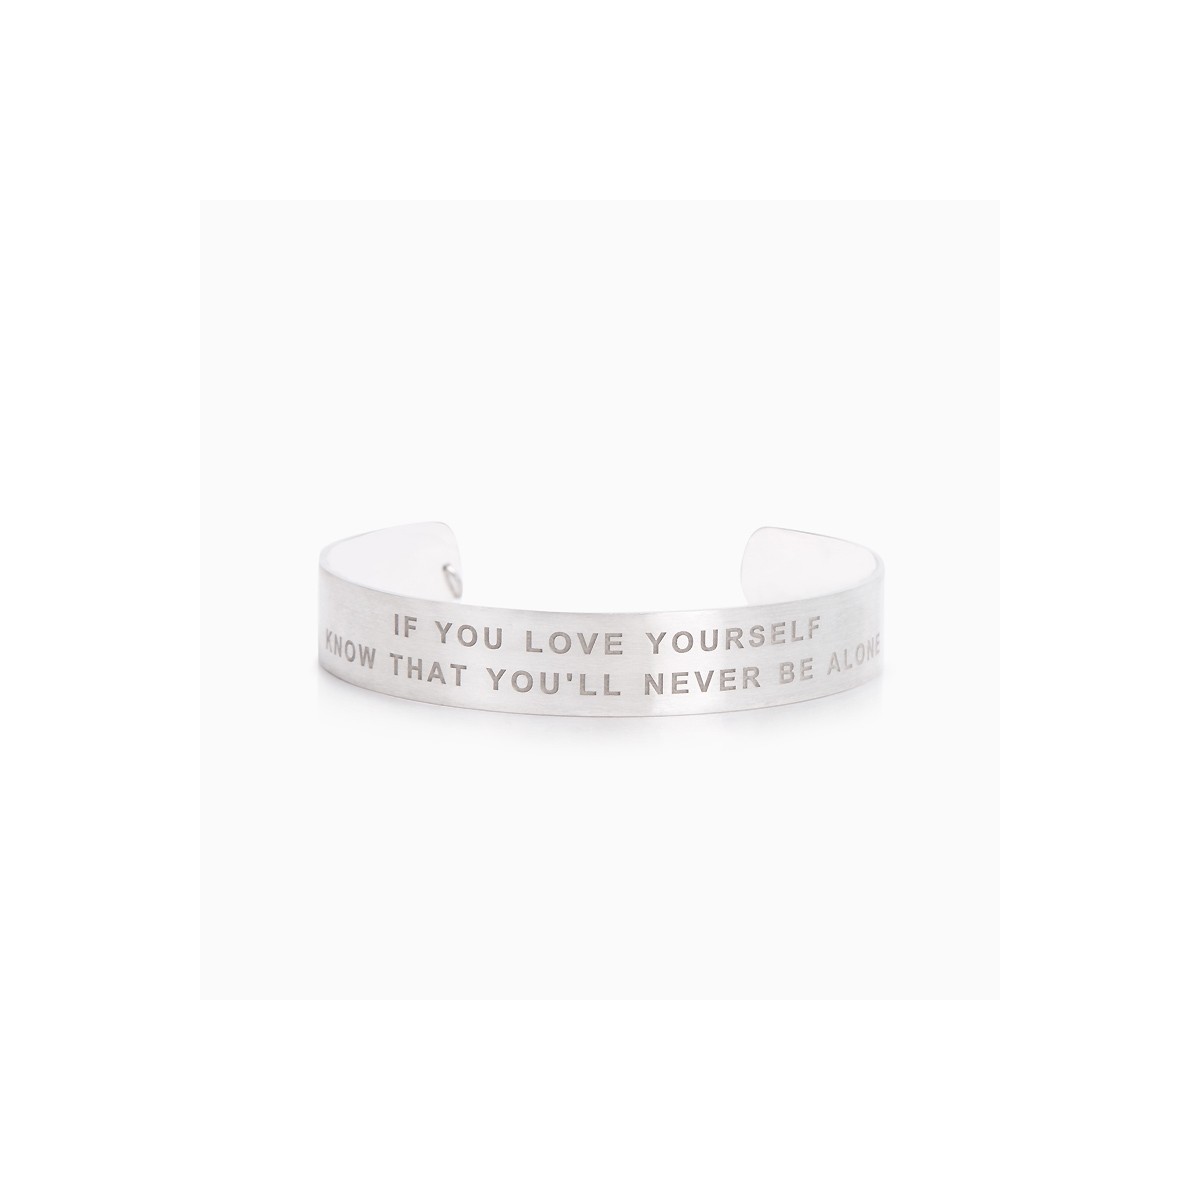 BRACELET WIDE IF YOU  LOVE YOURSELF  KNOW THAT YOU'LL NEVER BE ALONE